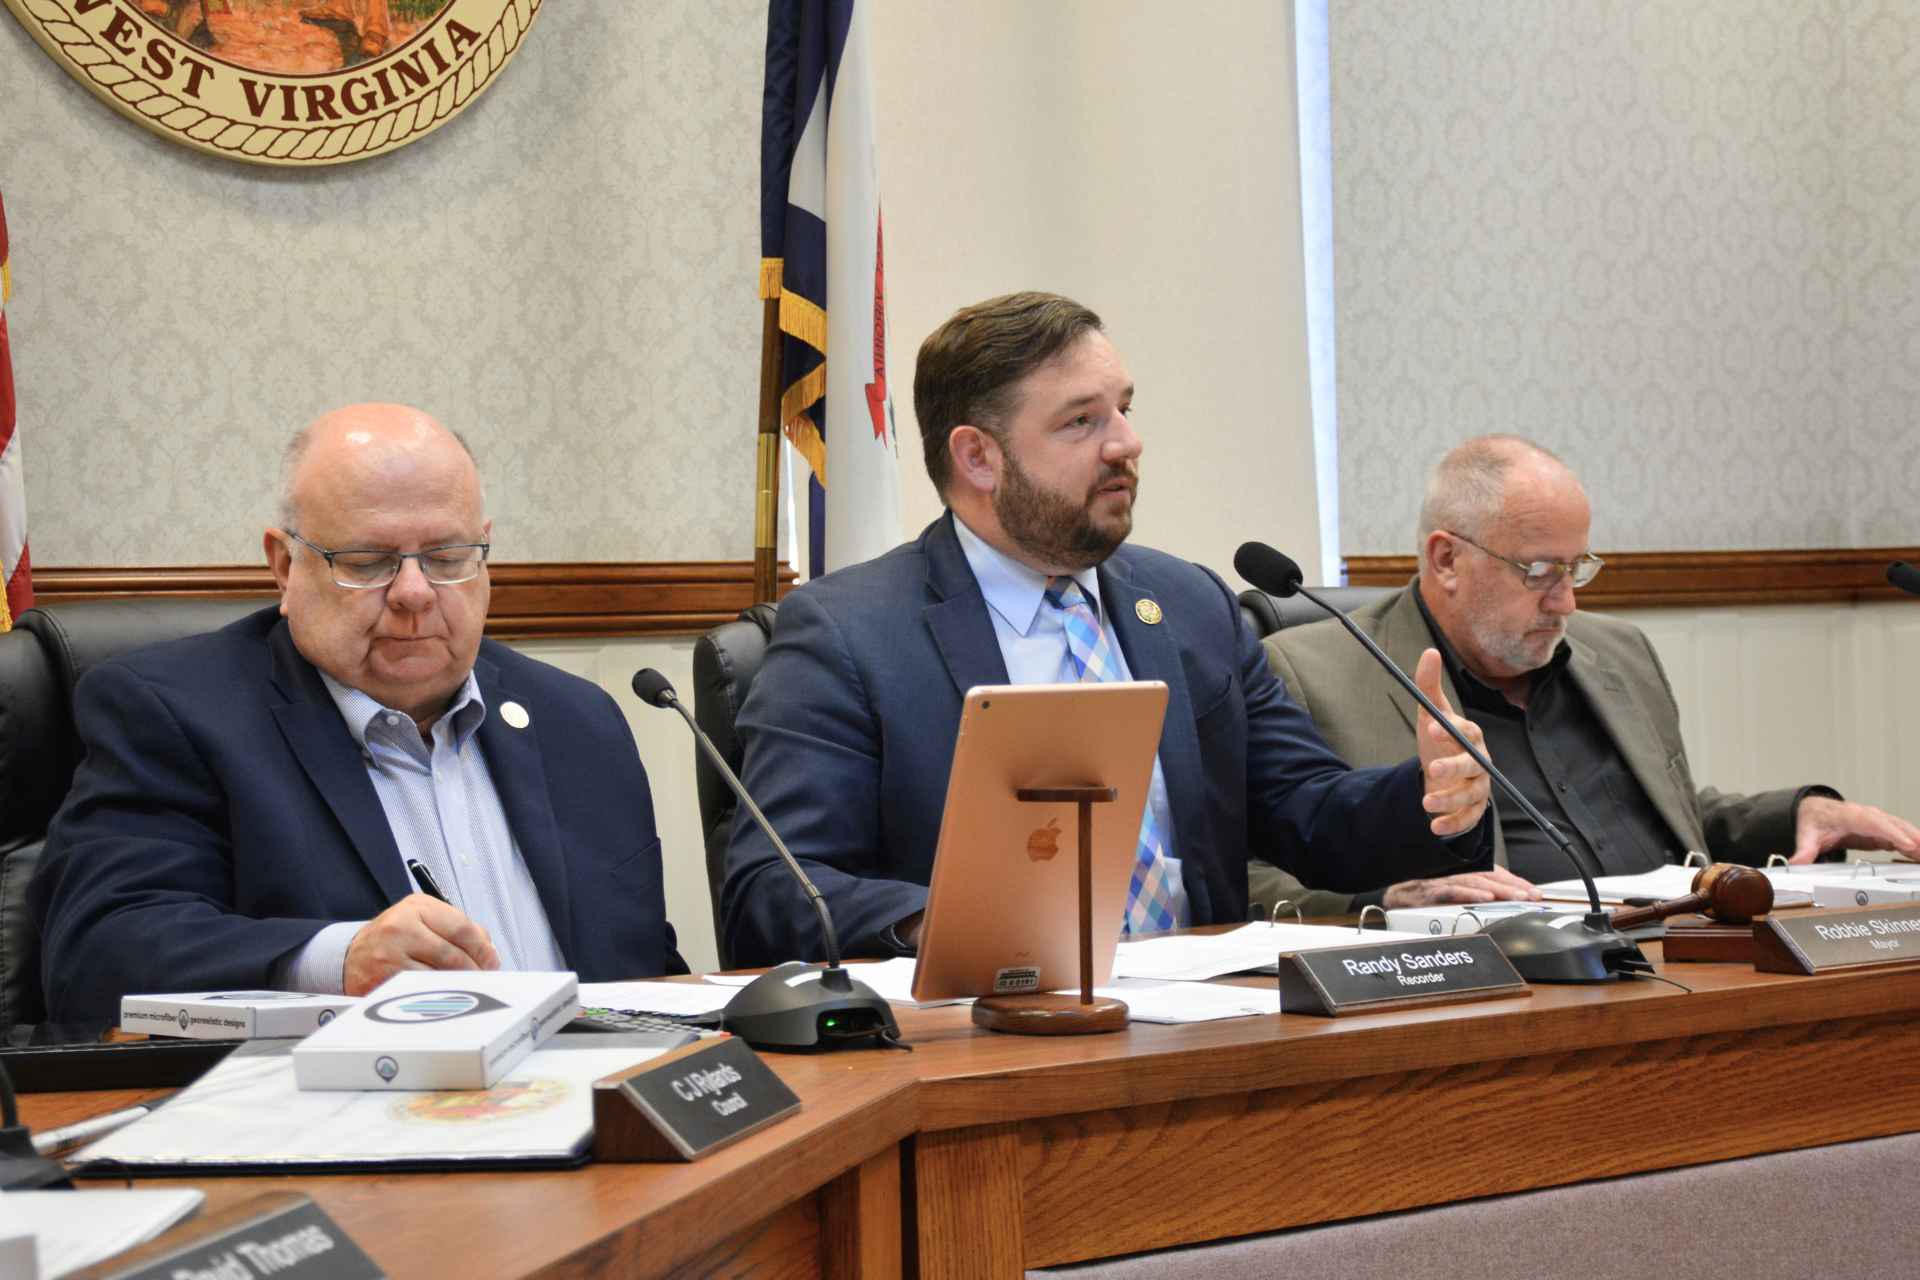 Pictured, from left, are Buckhannon City Recorder Randy Sanders, Mayor Robbie Skinner and council member Jack Reger at Buckhannon City Council’s April 18 meeting. (Katie Kuba / My Buckhannon)